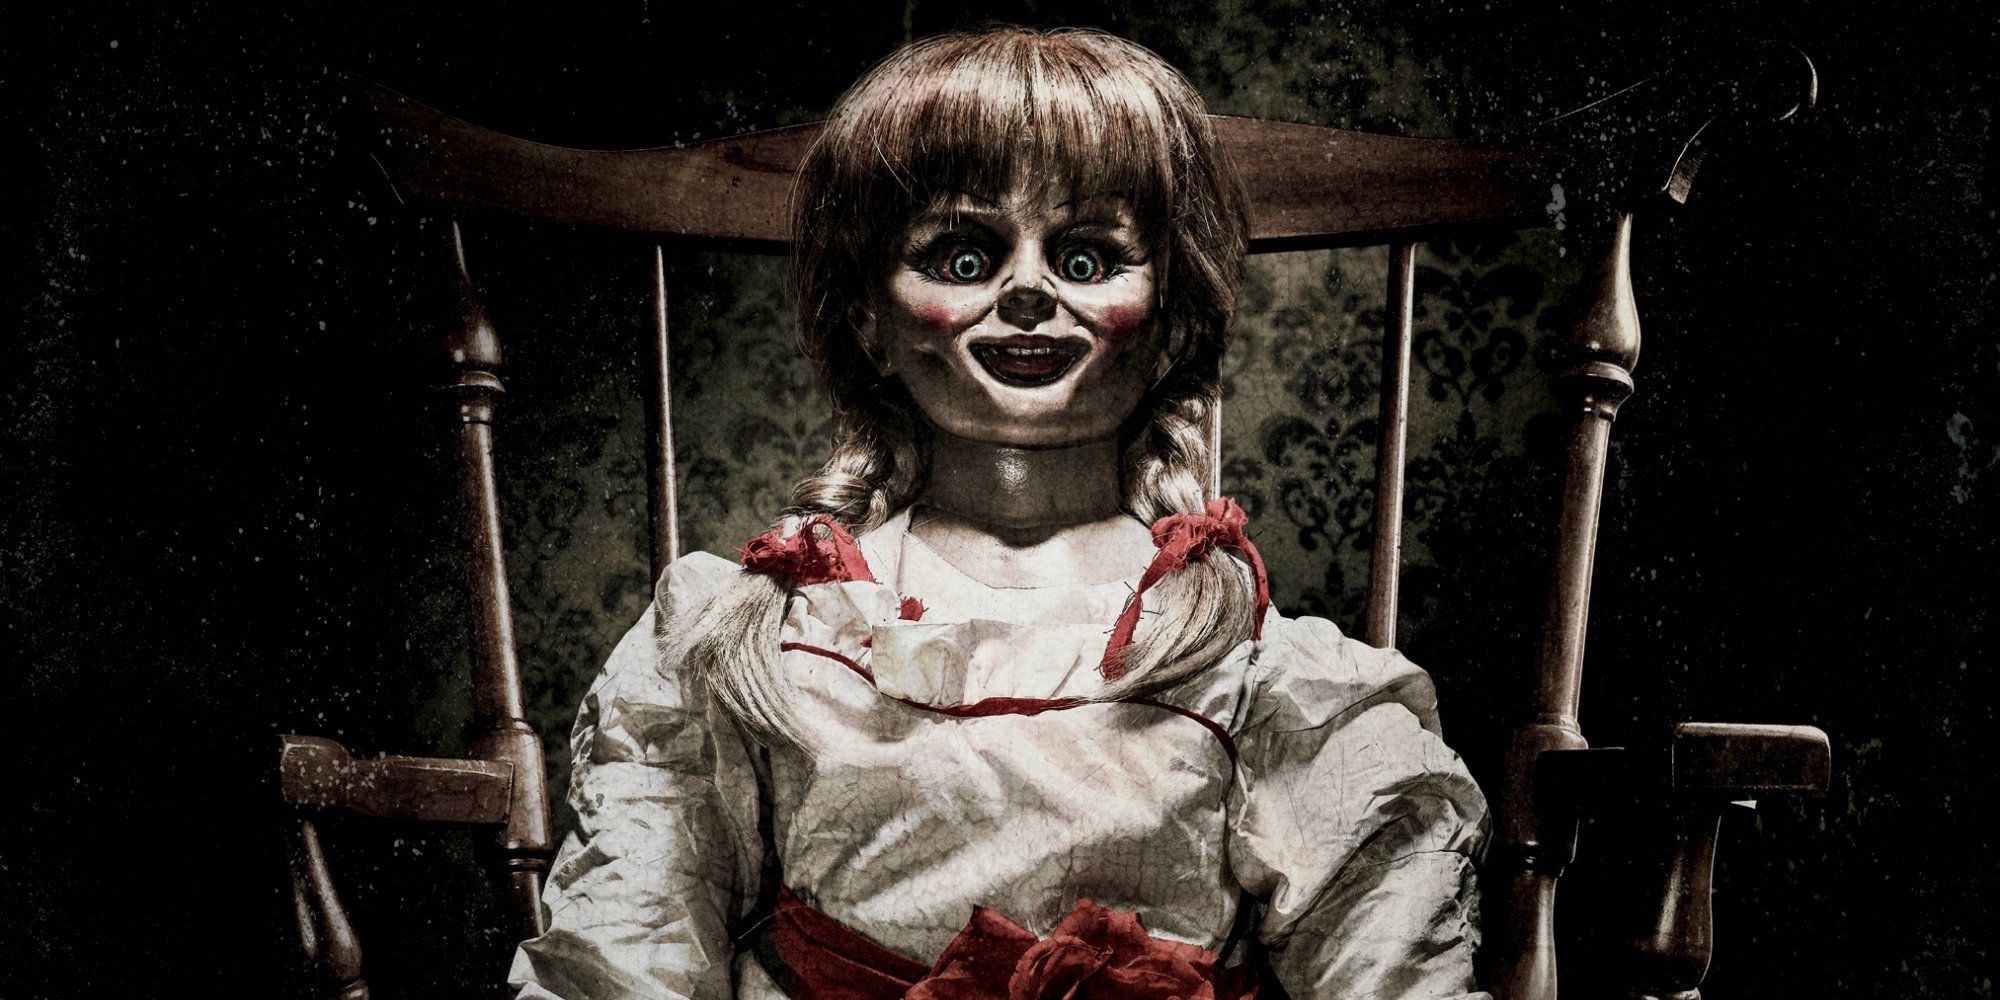 Annabelle 3 Gets An Official Title of Annabelle Comes Home